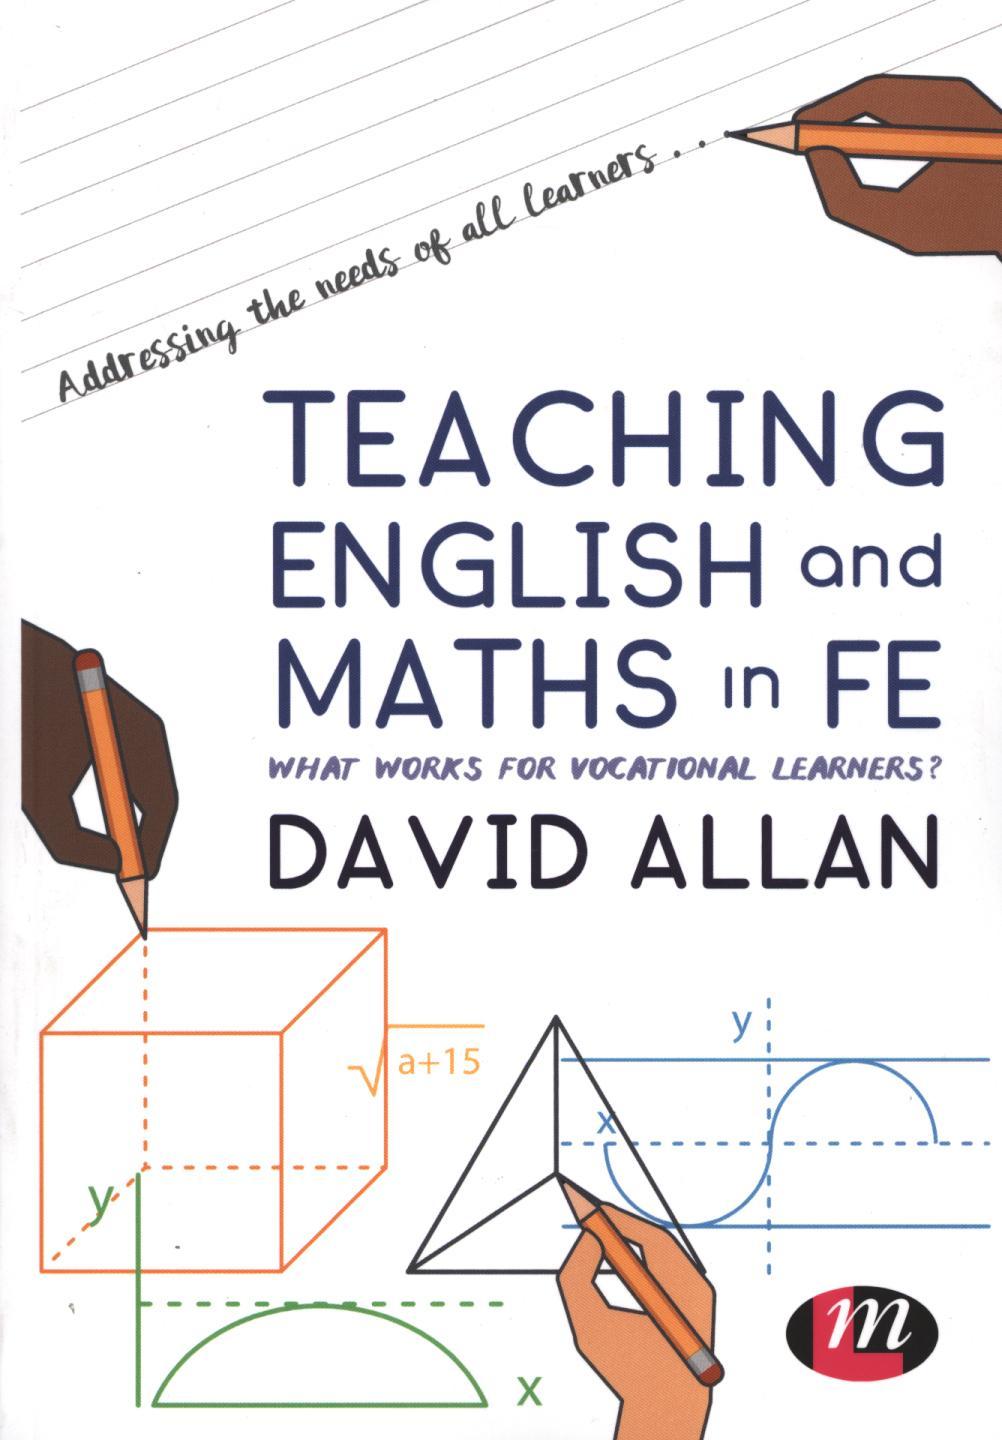 Teaching English and Maths in FE